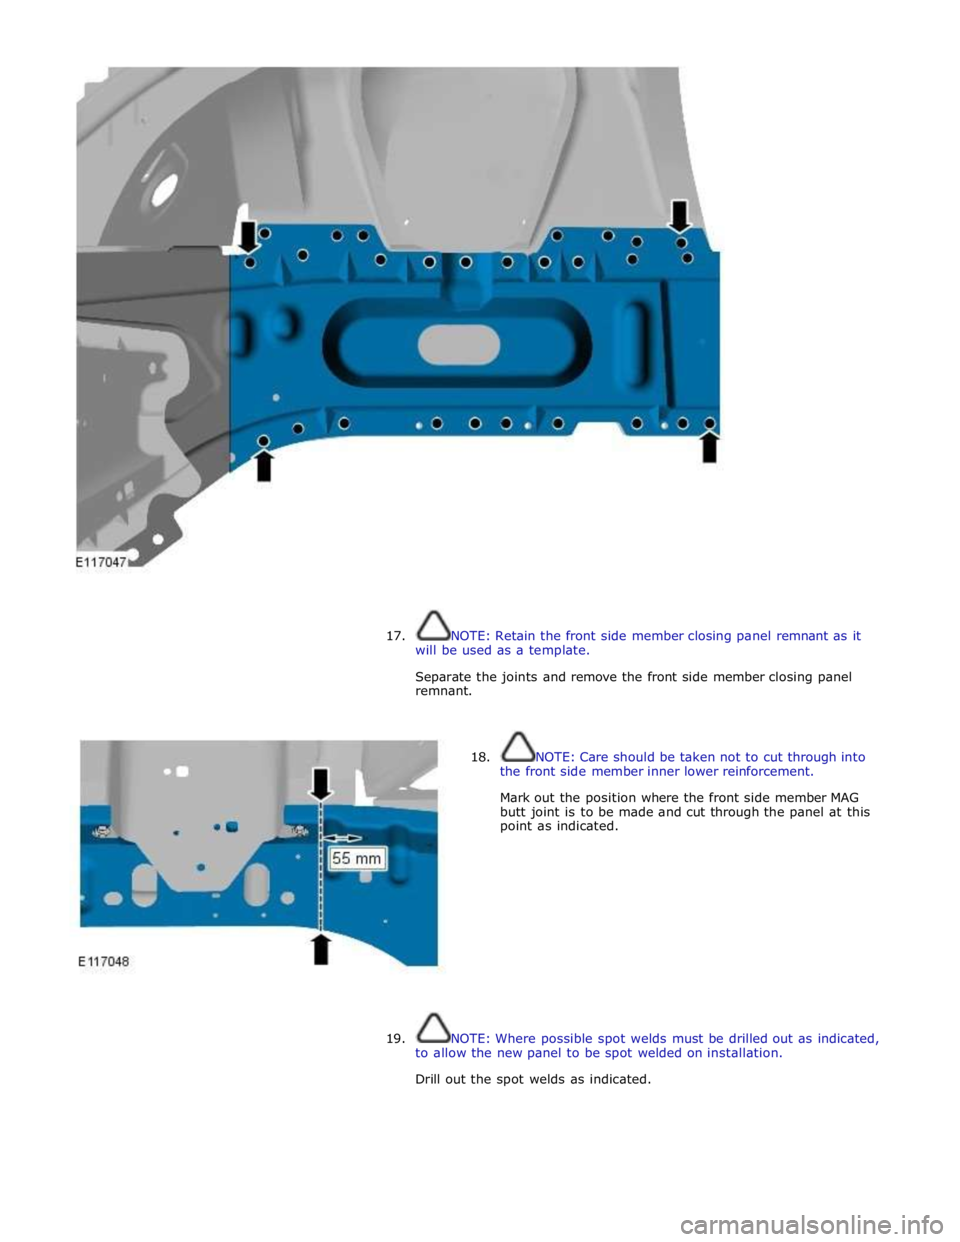 JAGUAR XFR 2010 1.G Workshop Manual  
 
 
 
17. NOTE: Retain the front side member closing panel remnant as it 
will be used as a template. 
 
Separate the joints and remove the front side member closing panel 
remnant. 
 
 
18. NOTE: C